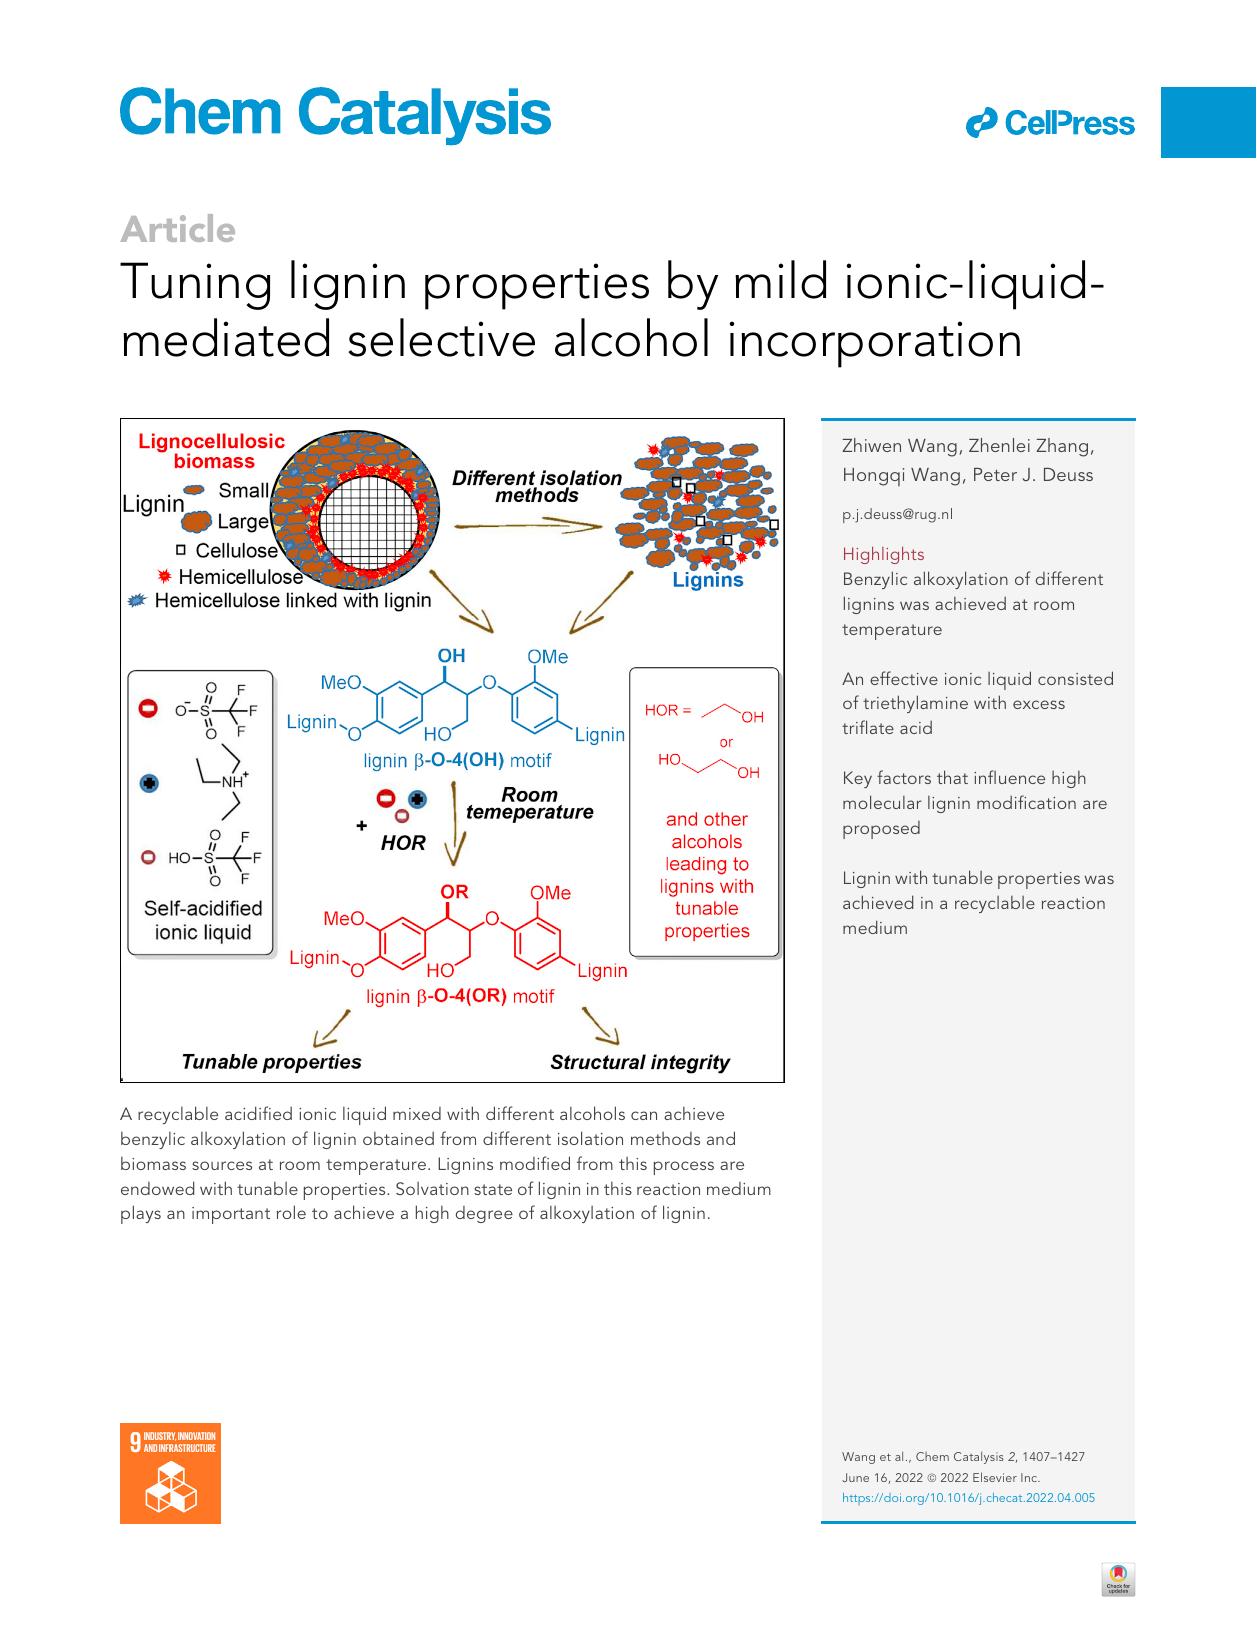 Tuning lignin properties by mild ionic-liquid-mediated selective alcohol incorporation by Zhiwen Wang